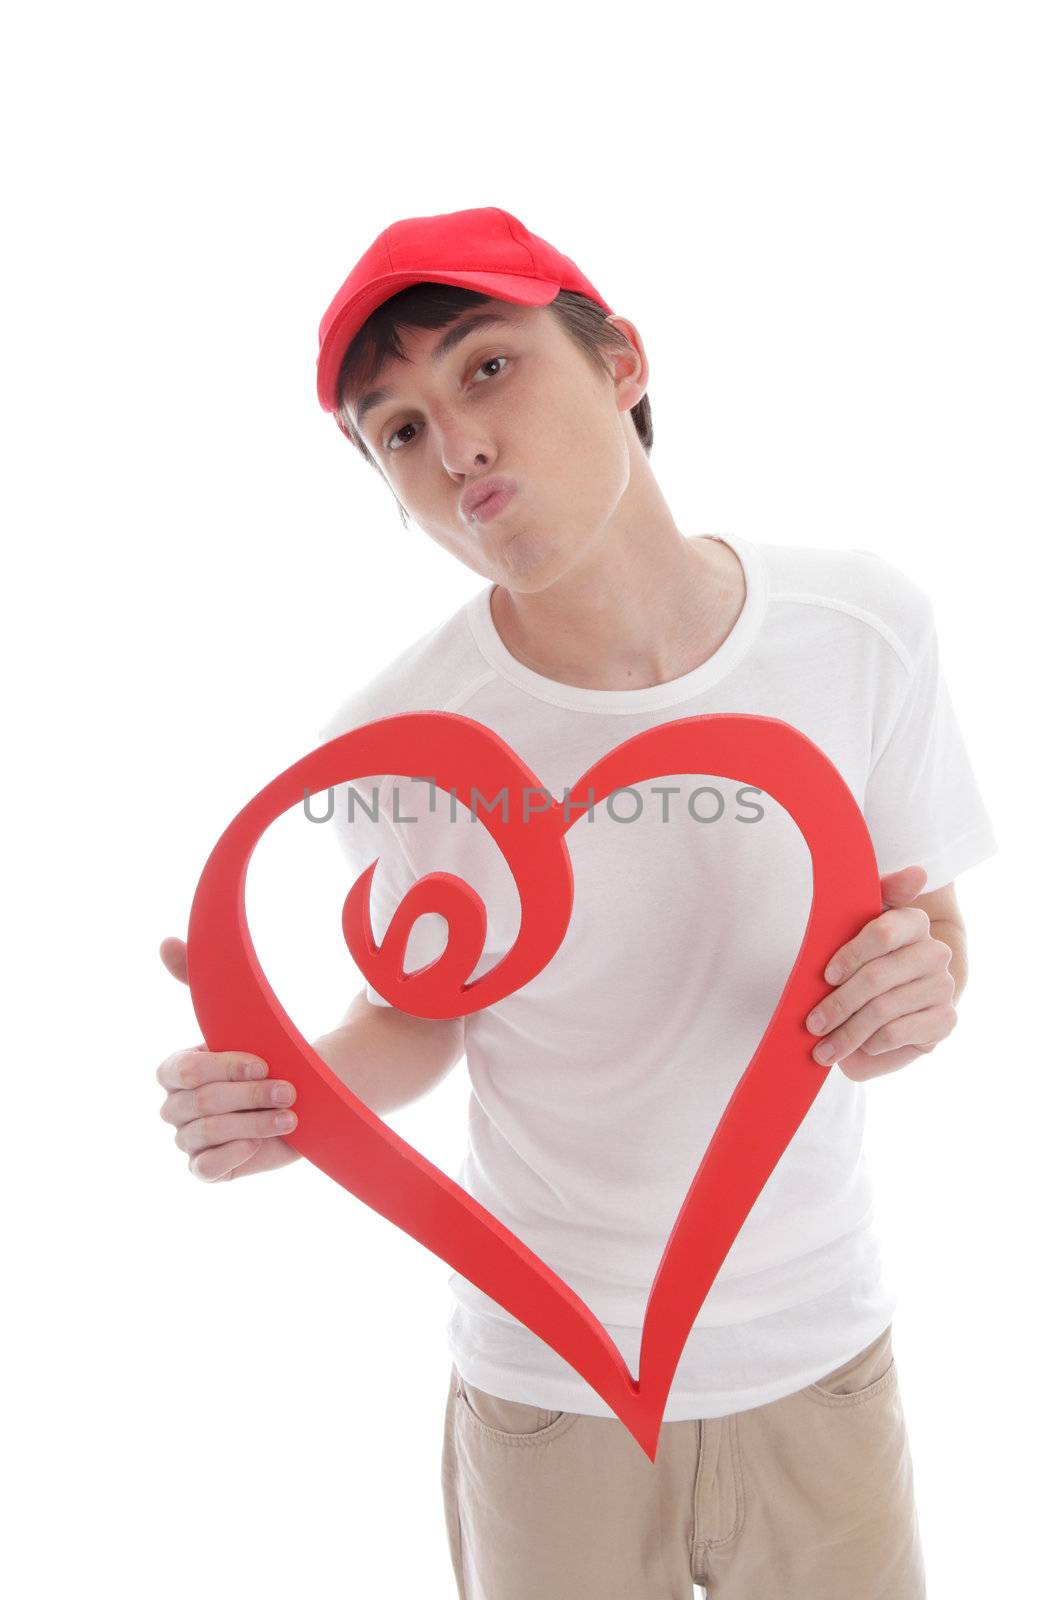 A teenage boy holding a red love heart with lips puckered up kissing.  White background.